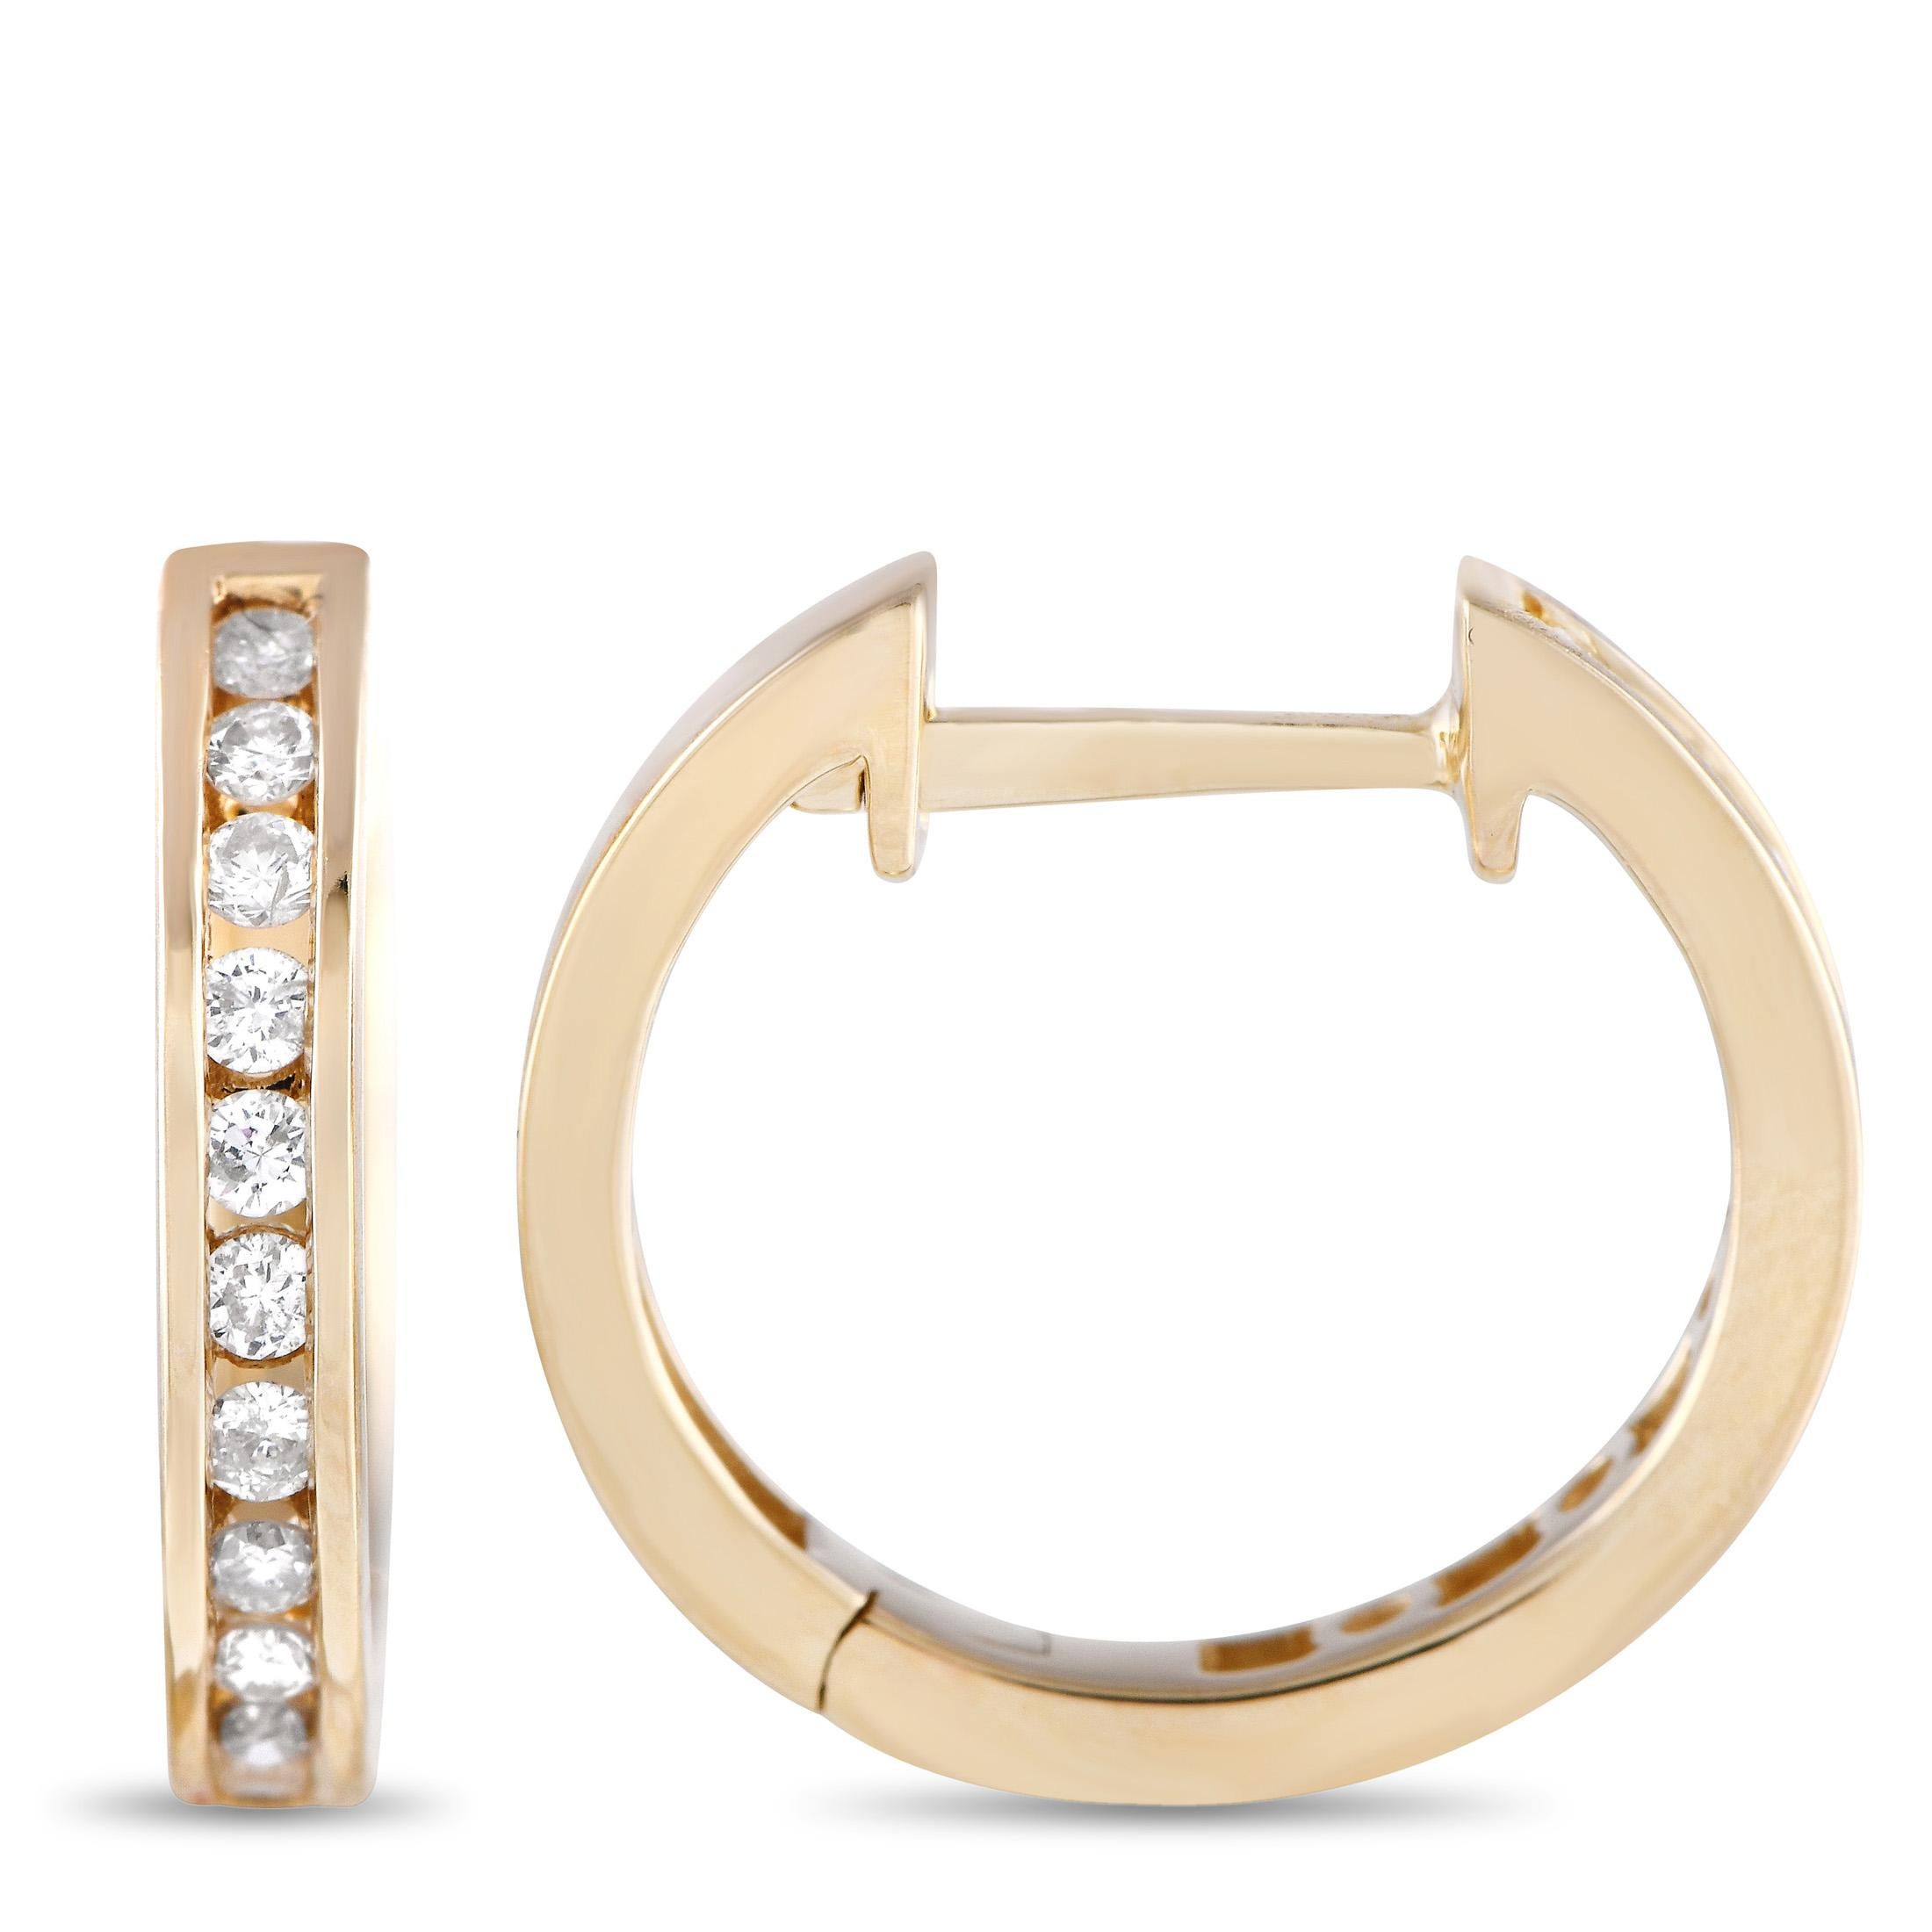 Channel-set diamonds with a total weight of 0.25 carats make these hoop earrings undeniably elegant. Sleek and sophisticated in design, each one features a simple 14K Yellow Gold setting measuring 0.60” round. 

This jewelry piece is offered in